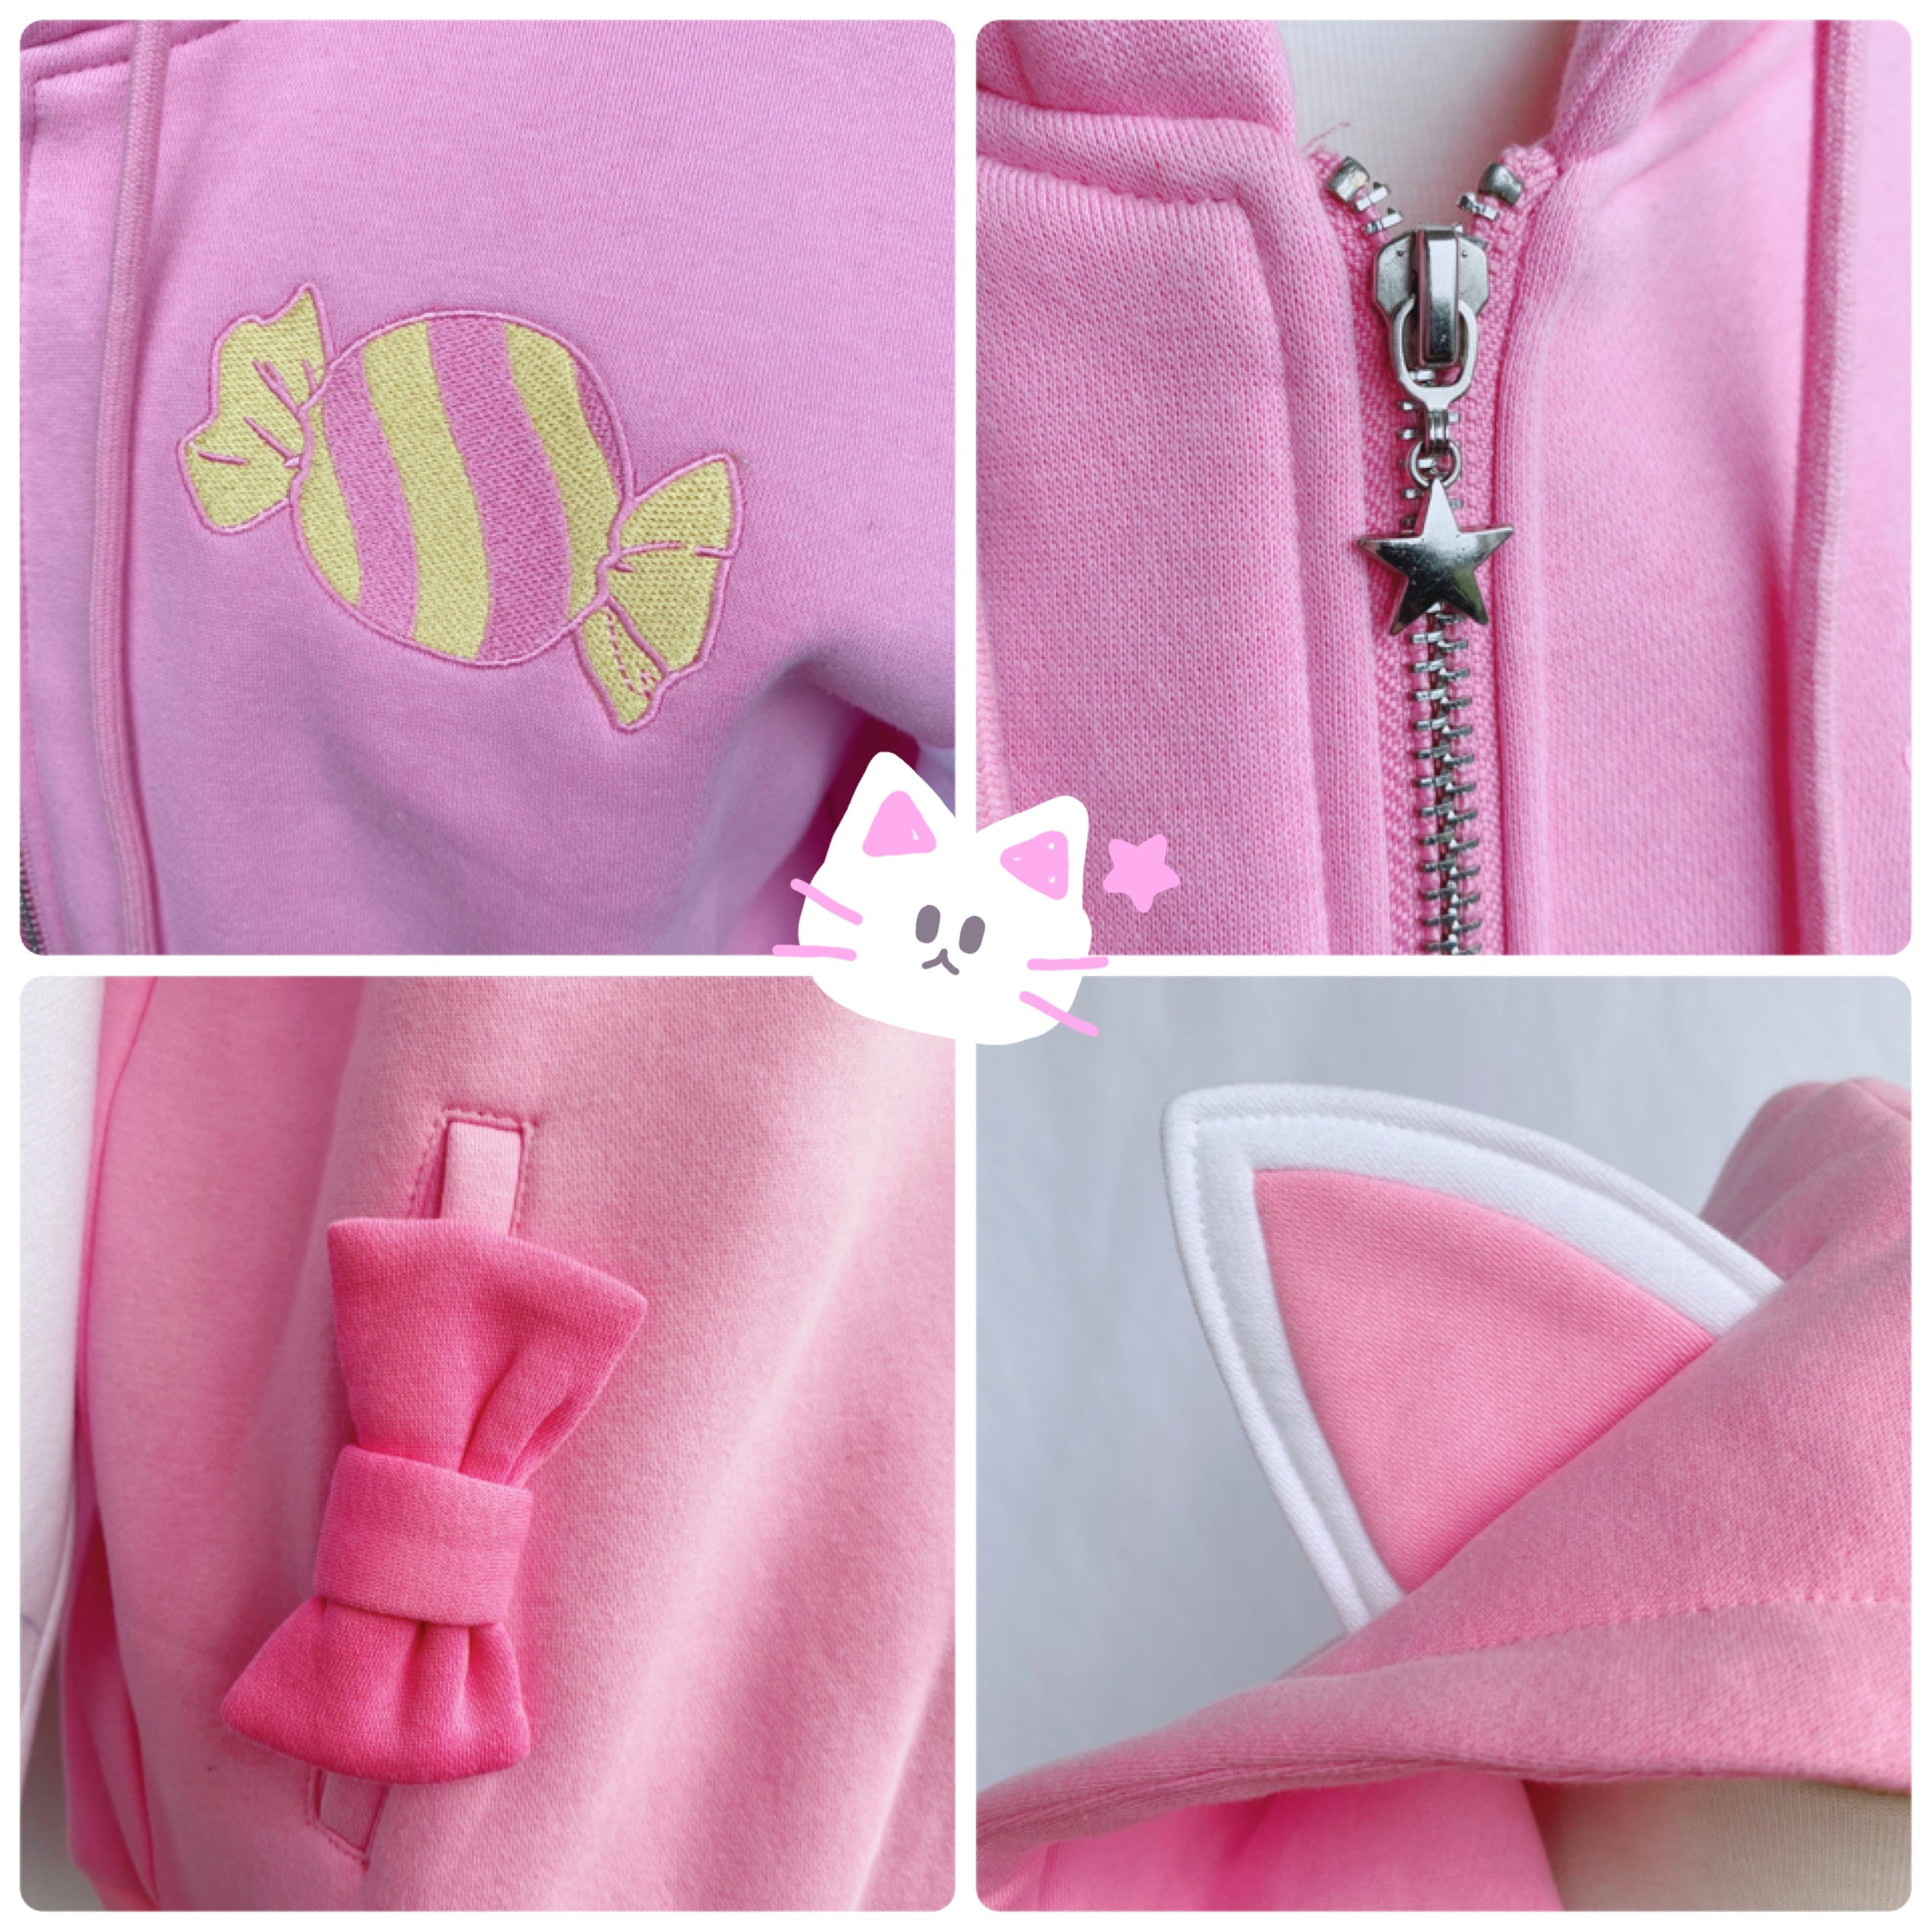 Candy Kitty Hoodie